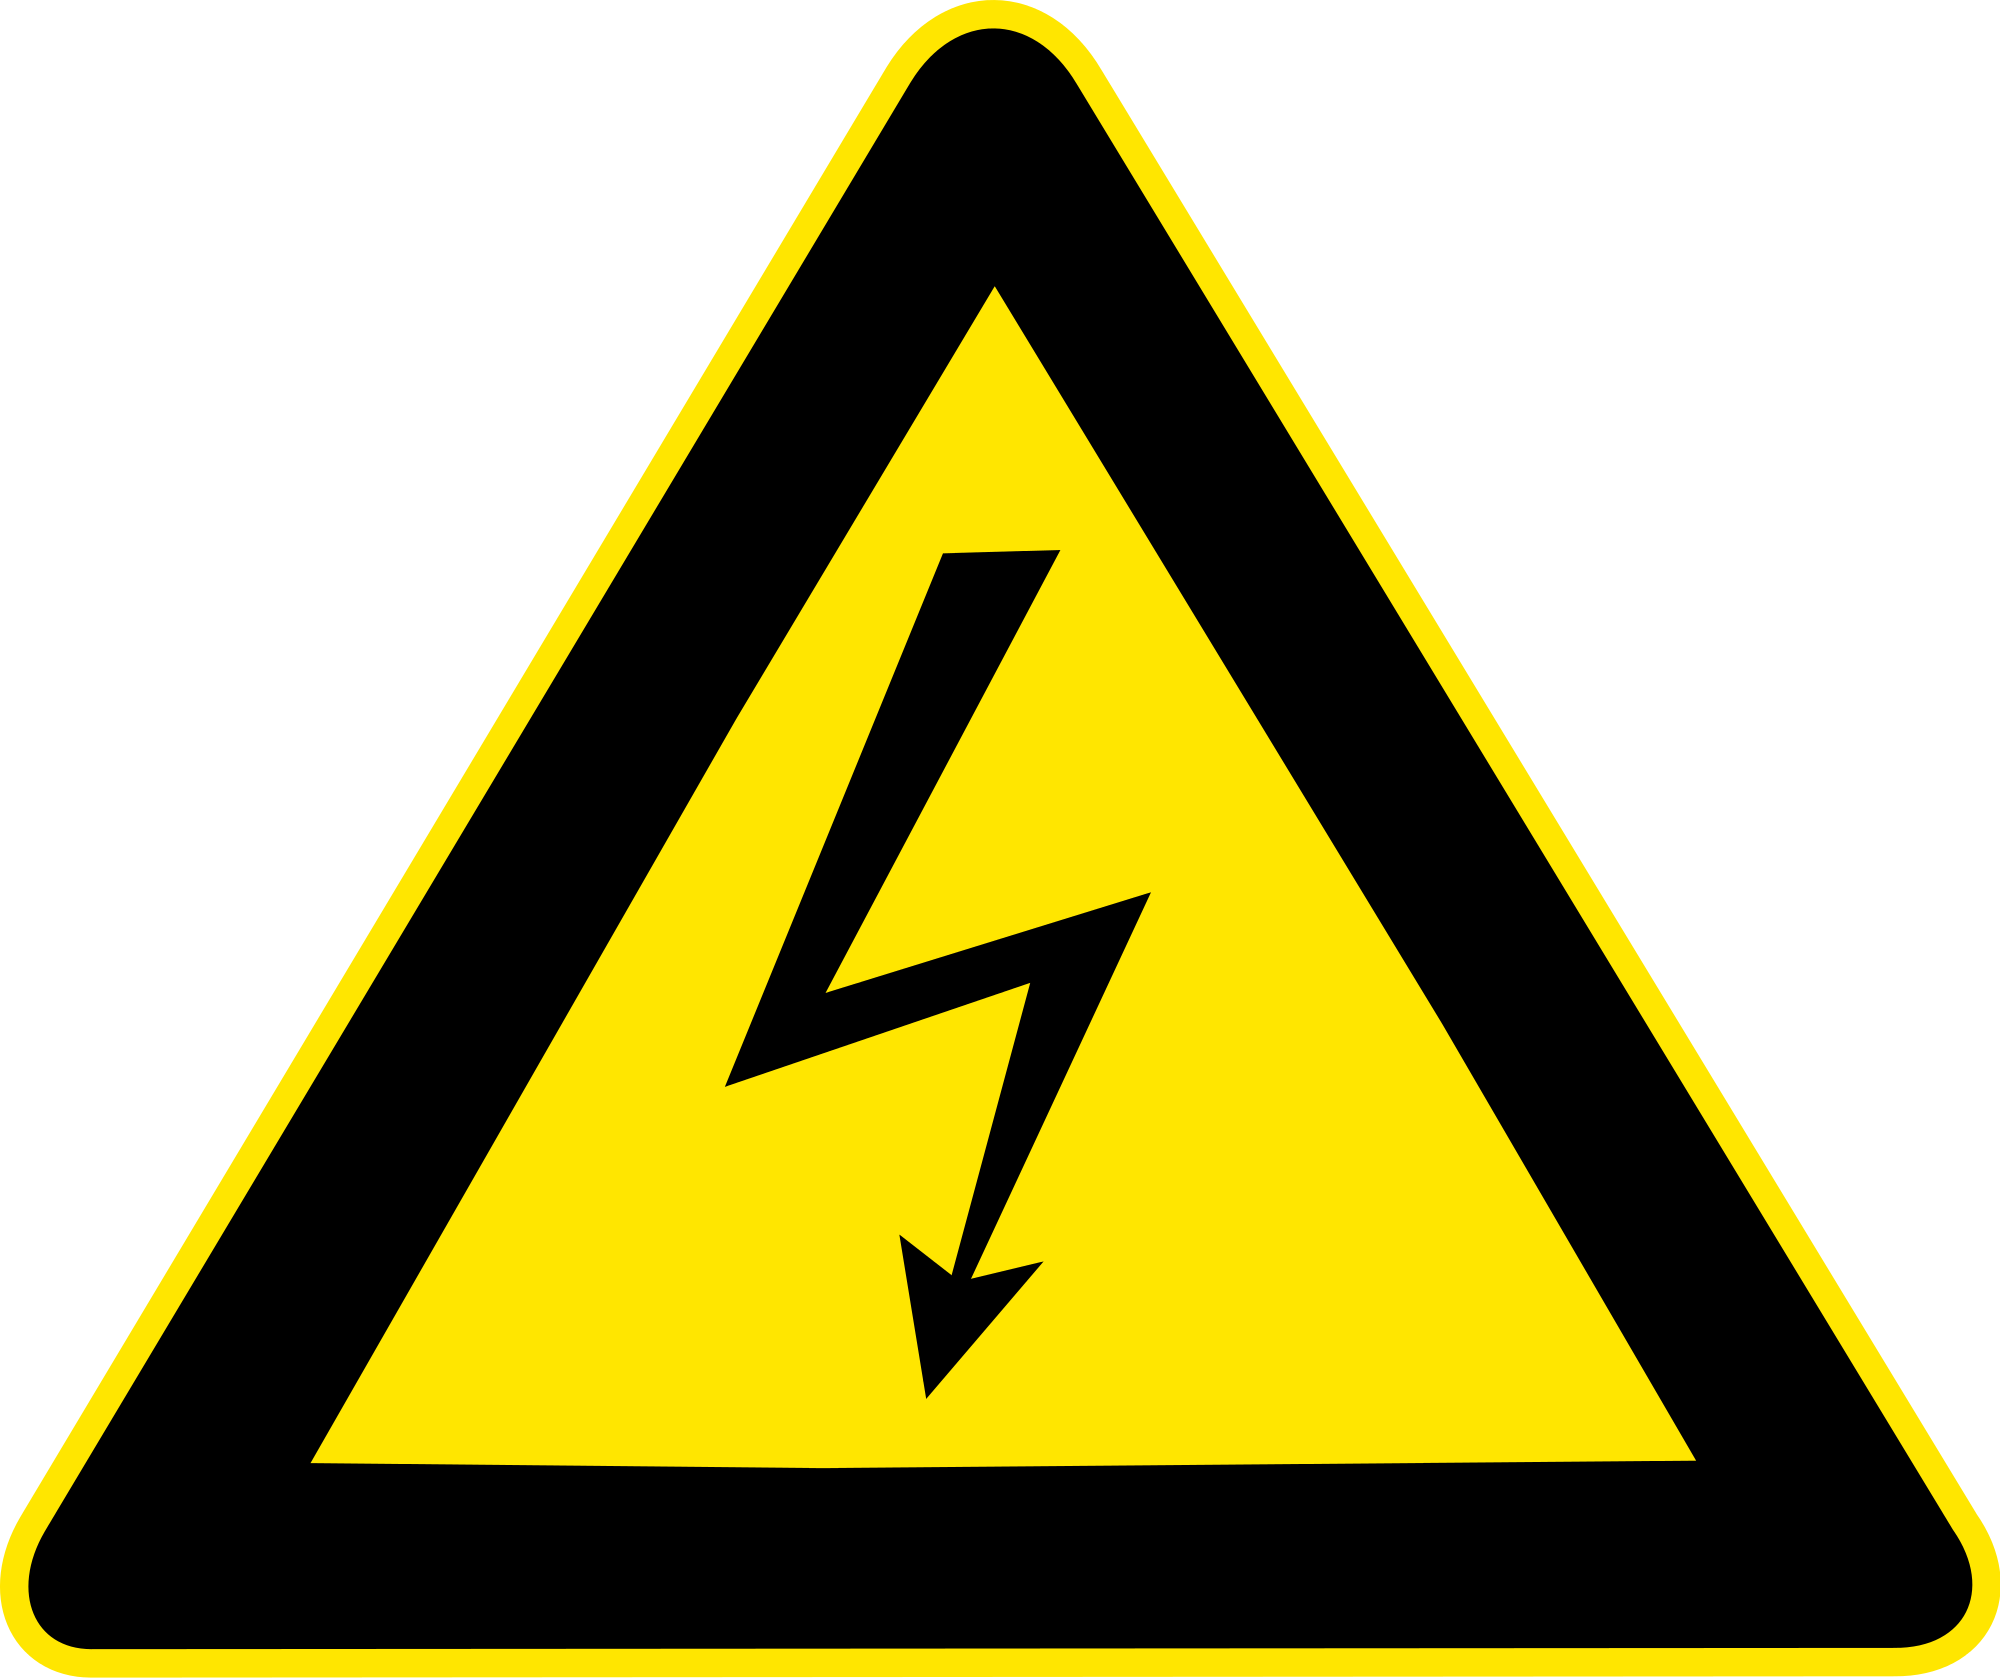 File:High voltage warning.svg - Wikimedia Commons